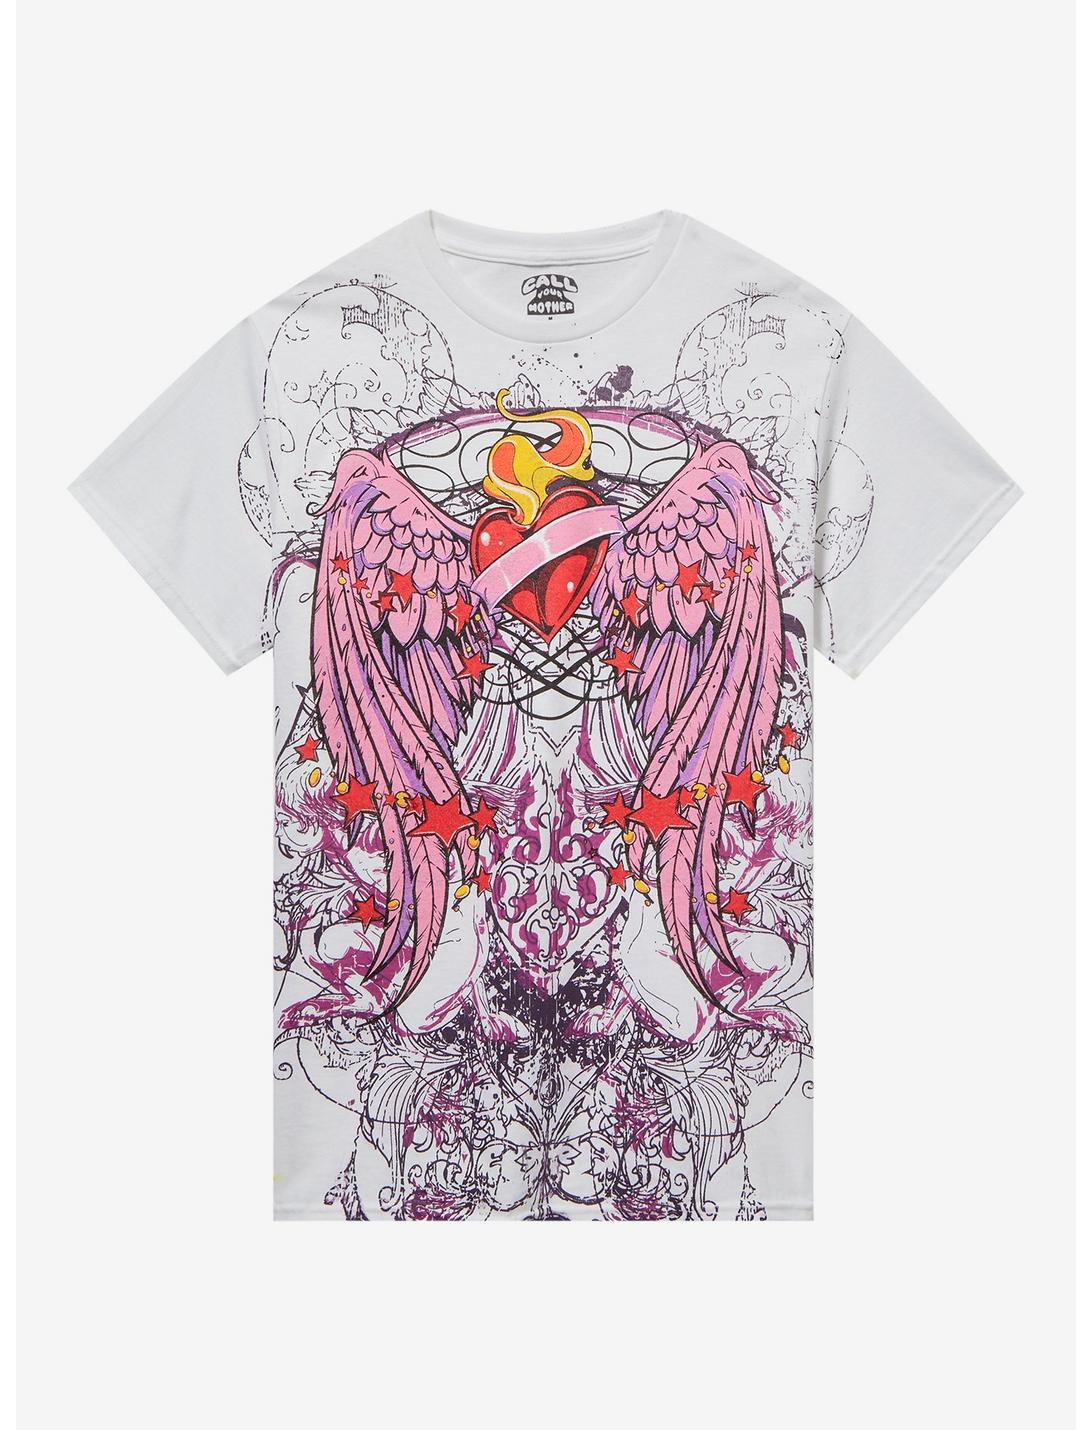 Angel Wing Heart Tattoo Art Boyfriend Fit Girls T-Shirt By Call Your Mother, MULTI, hi-res